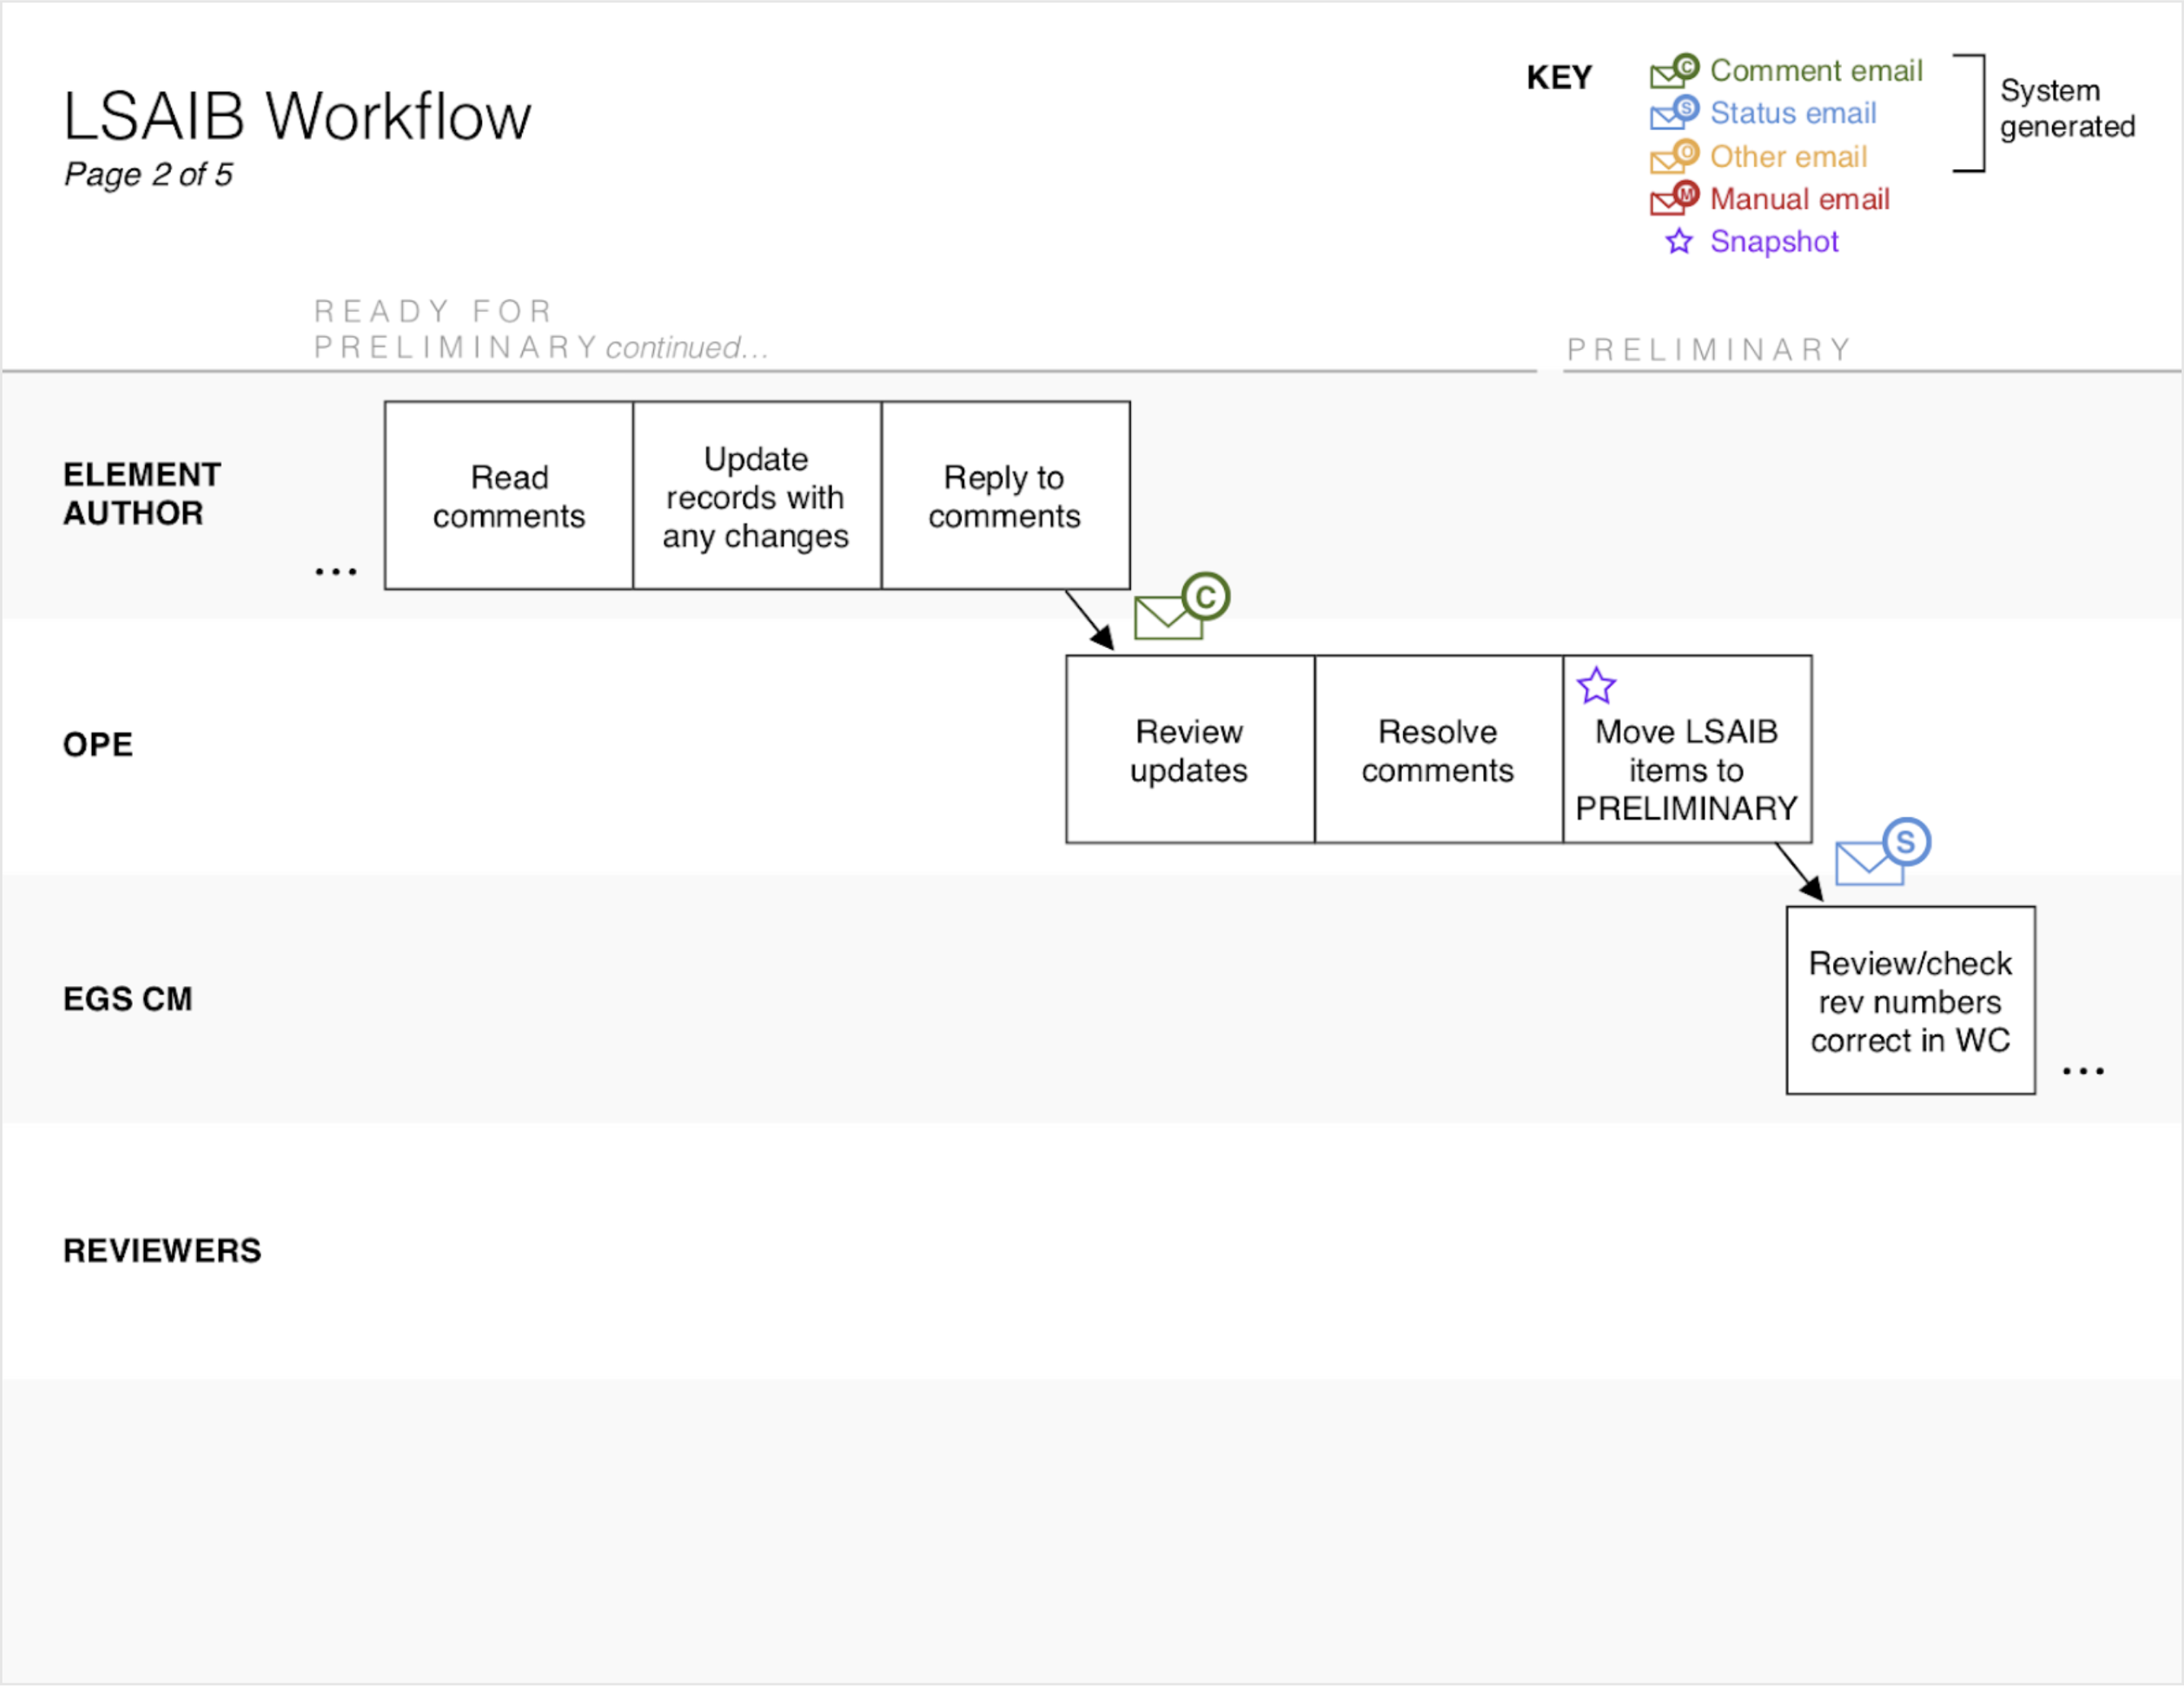 The new LSAIB workflow (Page 2 of 5)